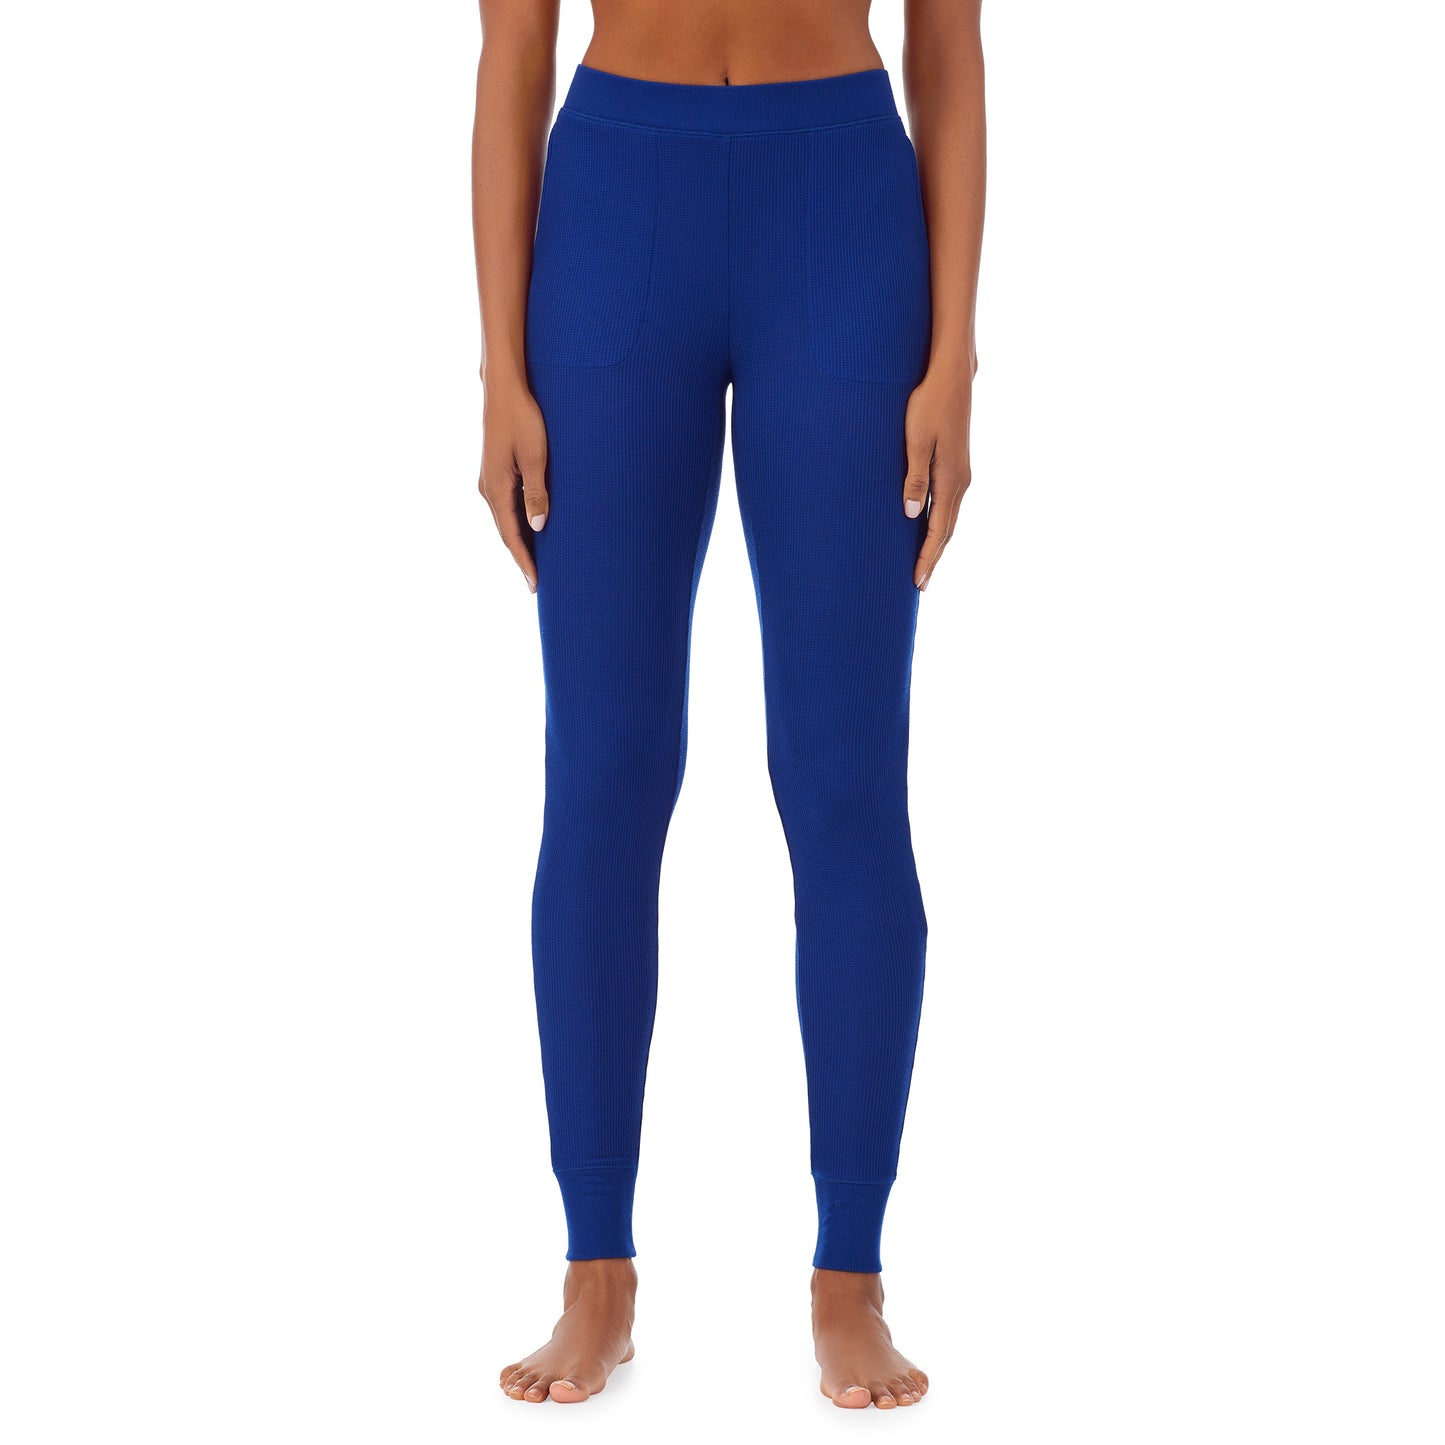 Royal Blue; Model is wearing size S. She is 5’9”, Bust 32”, Waist 25.5”, Hips 36”. @A lady wearing a royal blue legging.